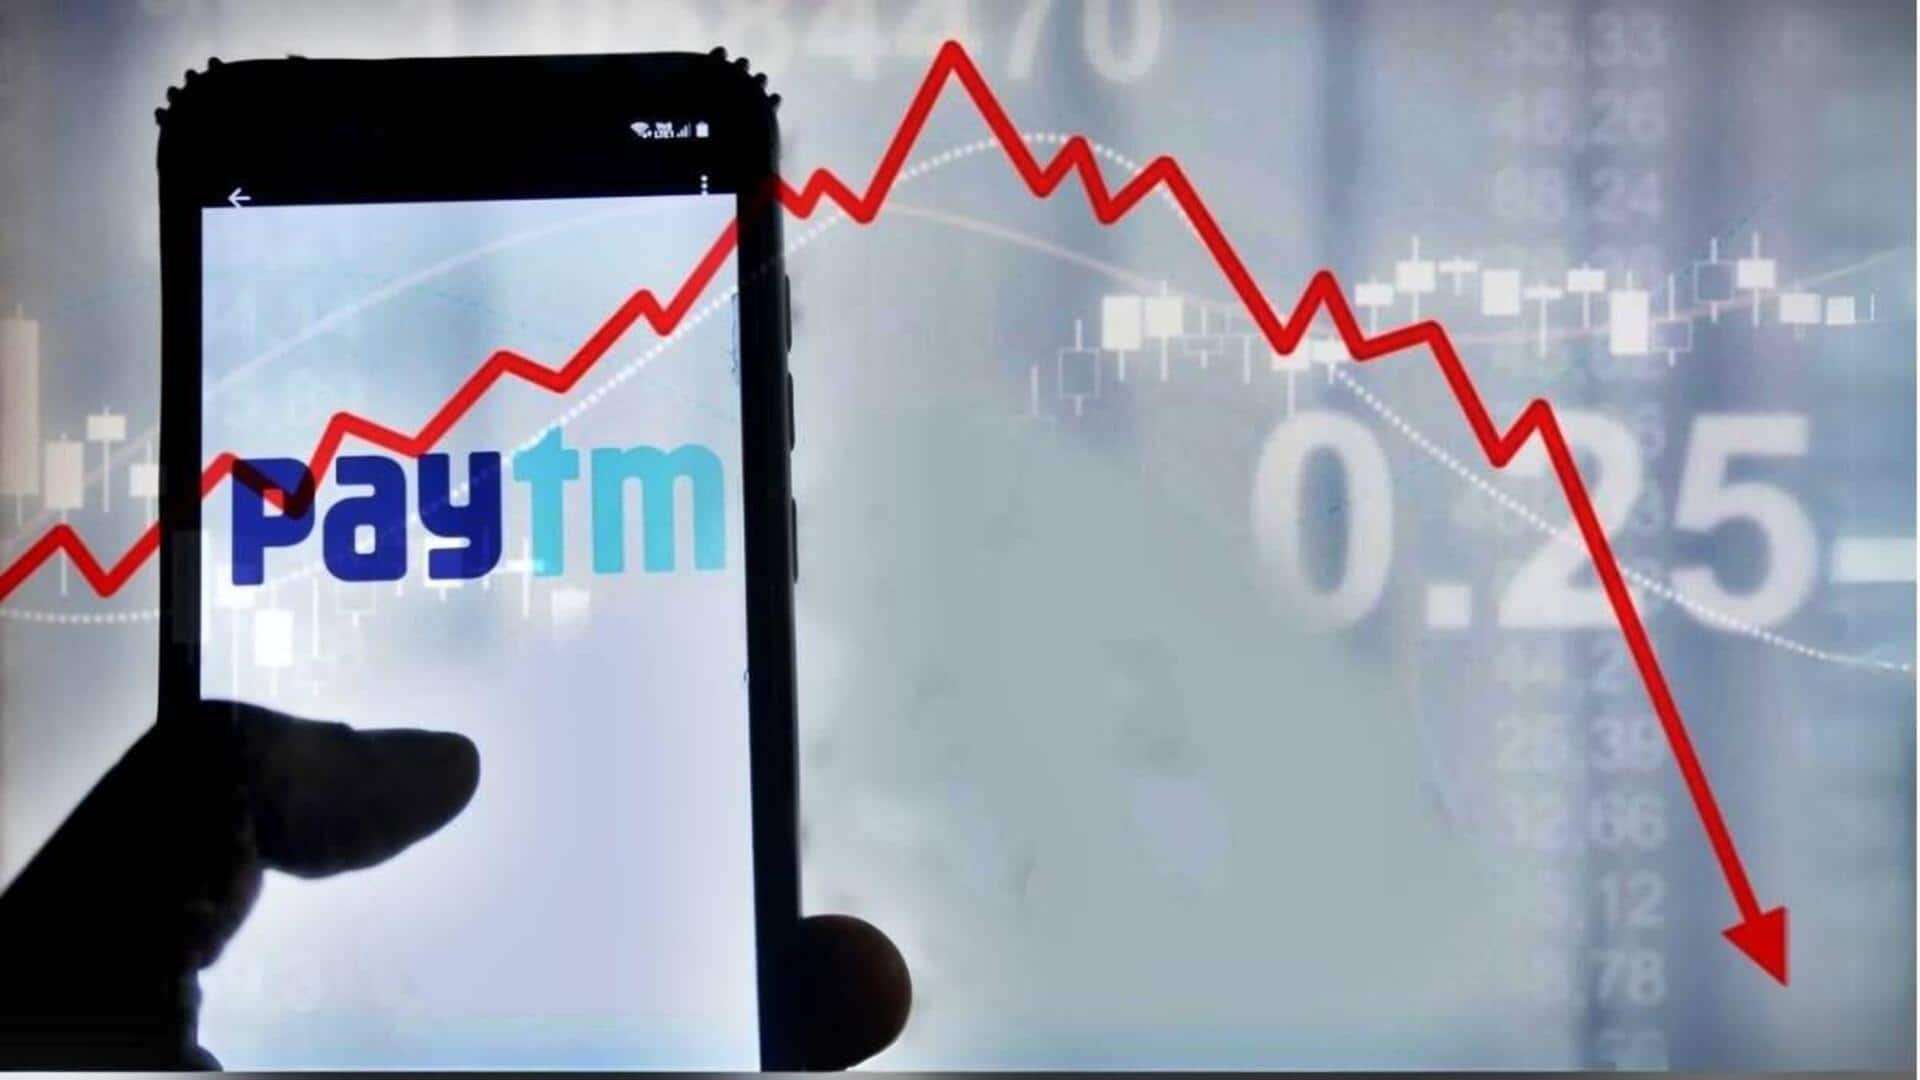 Following RBI curbs, Paytm shares fall 20% for second day